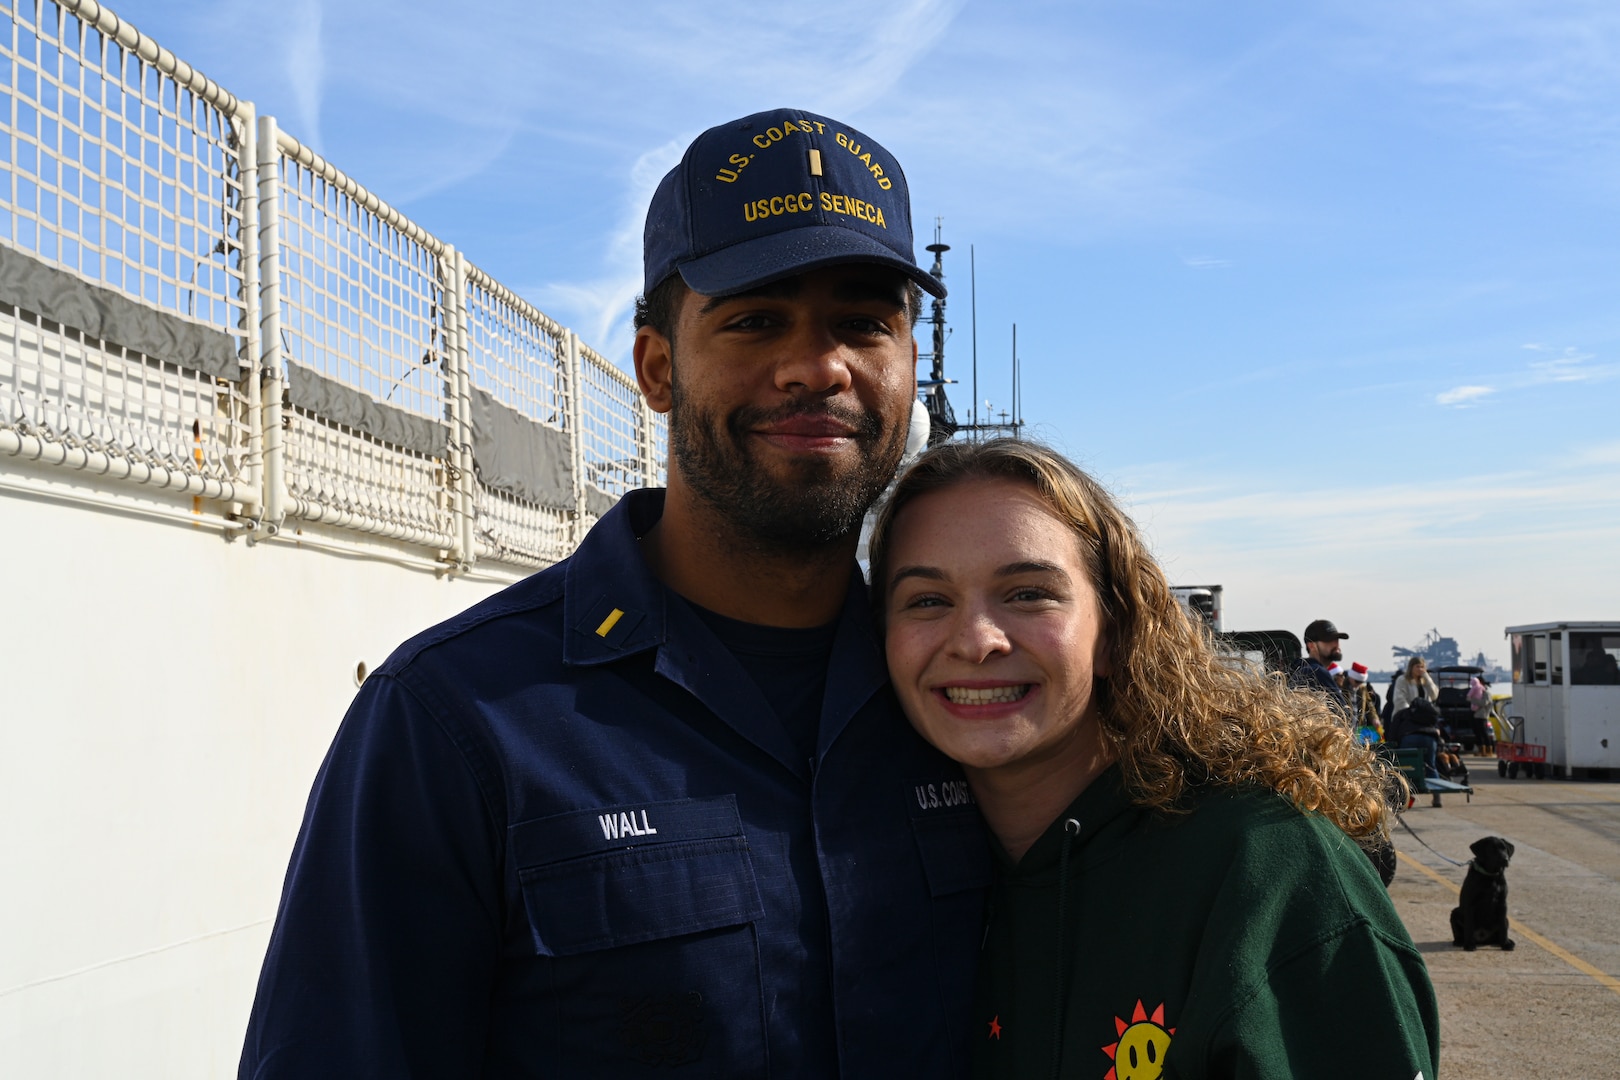 U.S. Coast Guard Ensign Tafari Wall, an officer assigned to U.S. Coast Guard Cutter Seneca (WMEC 906), poses for a photo at the cutter's return to homeport in Portsmouth, Virginia, Dec. 22, 2023, following a 65-day patrol in the Western Caribbean and Eastern Pacific Ocean. Patrolling in support of Joint Interagency Task Force-South, Seneca worked alongside other Coast Guard cutters, Department of Defense and Department of Homeland Security units, and international partners to conduct maritime safety and security missions.